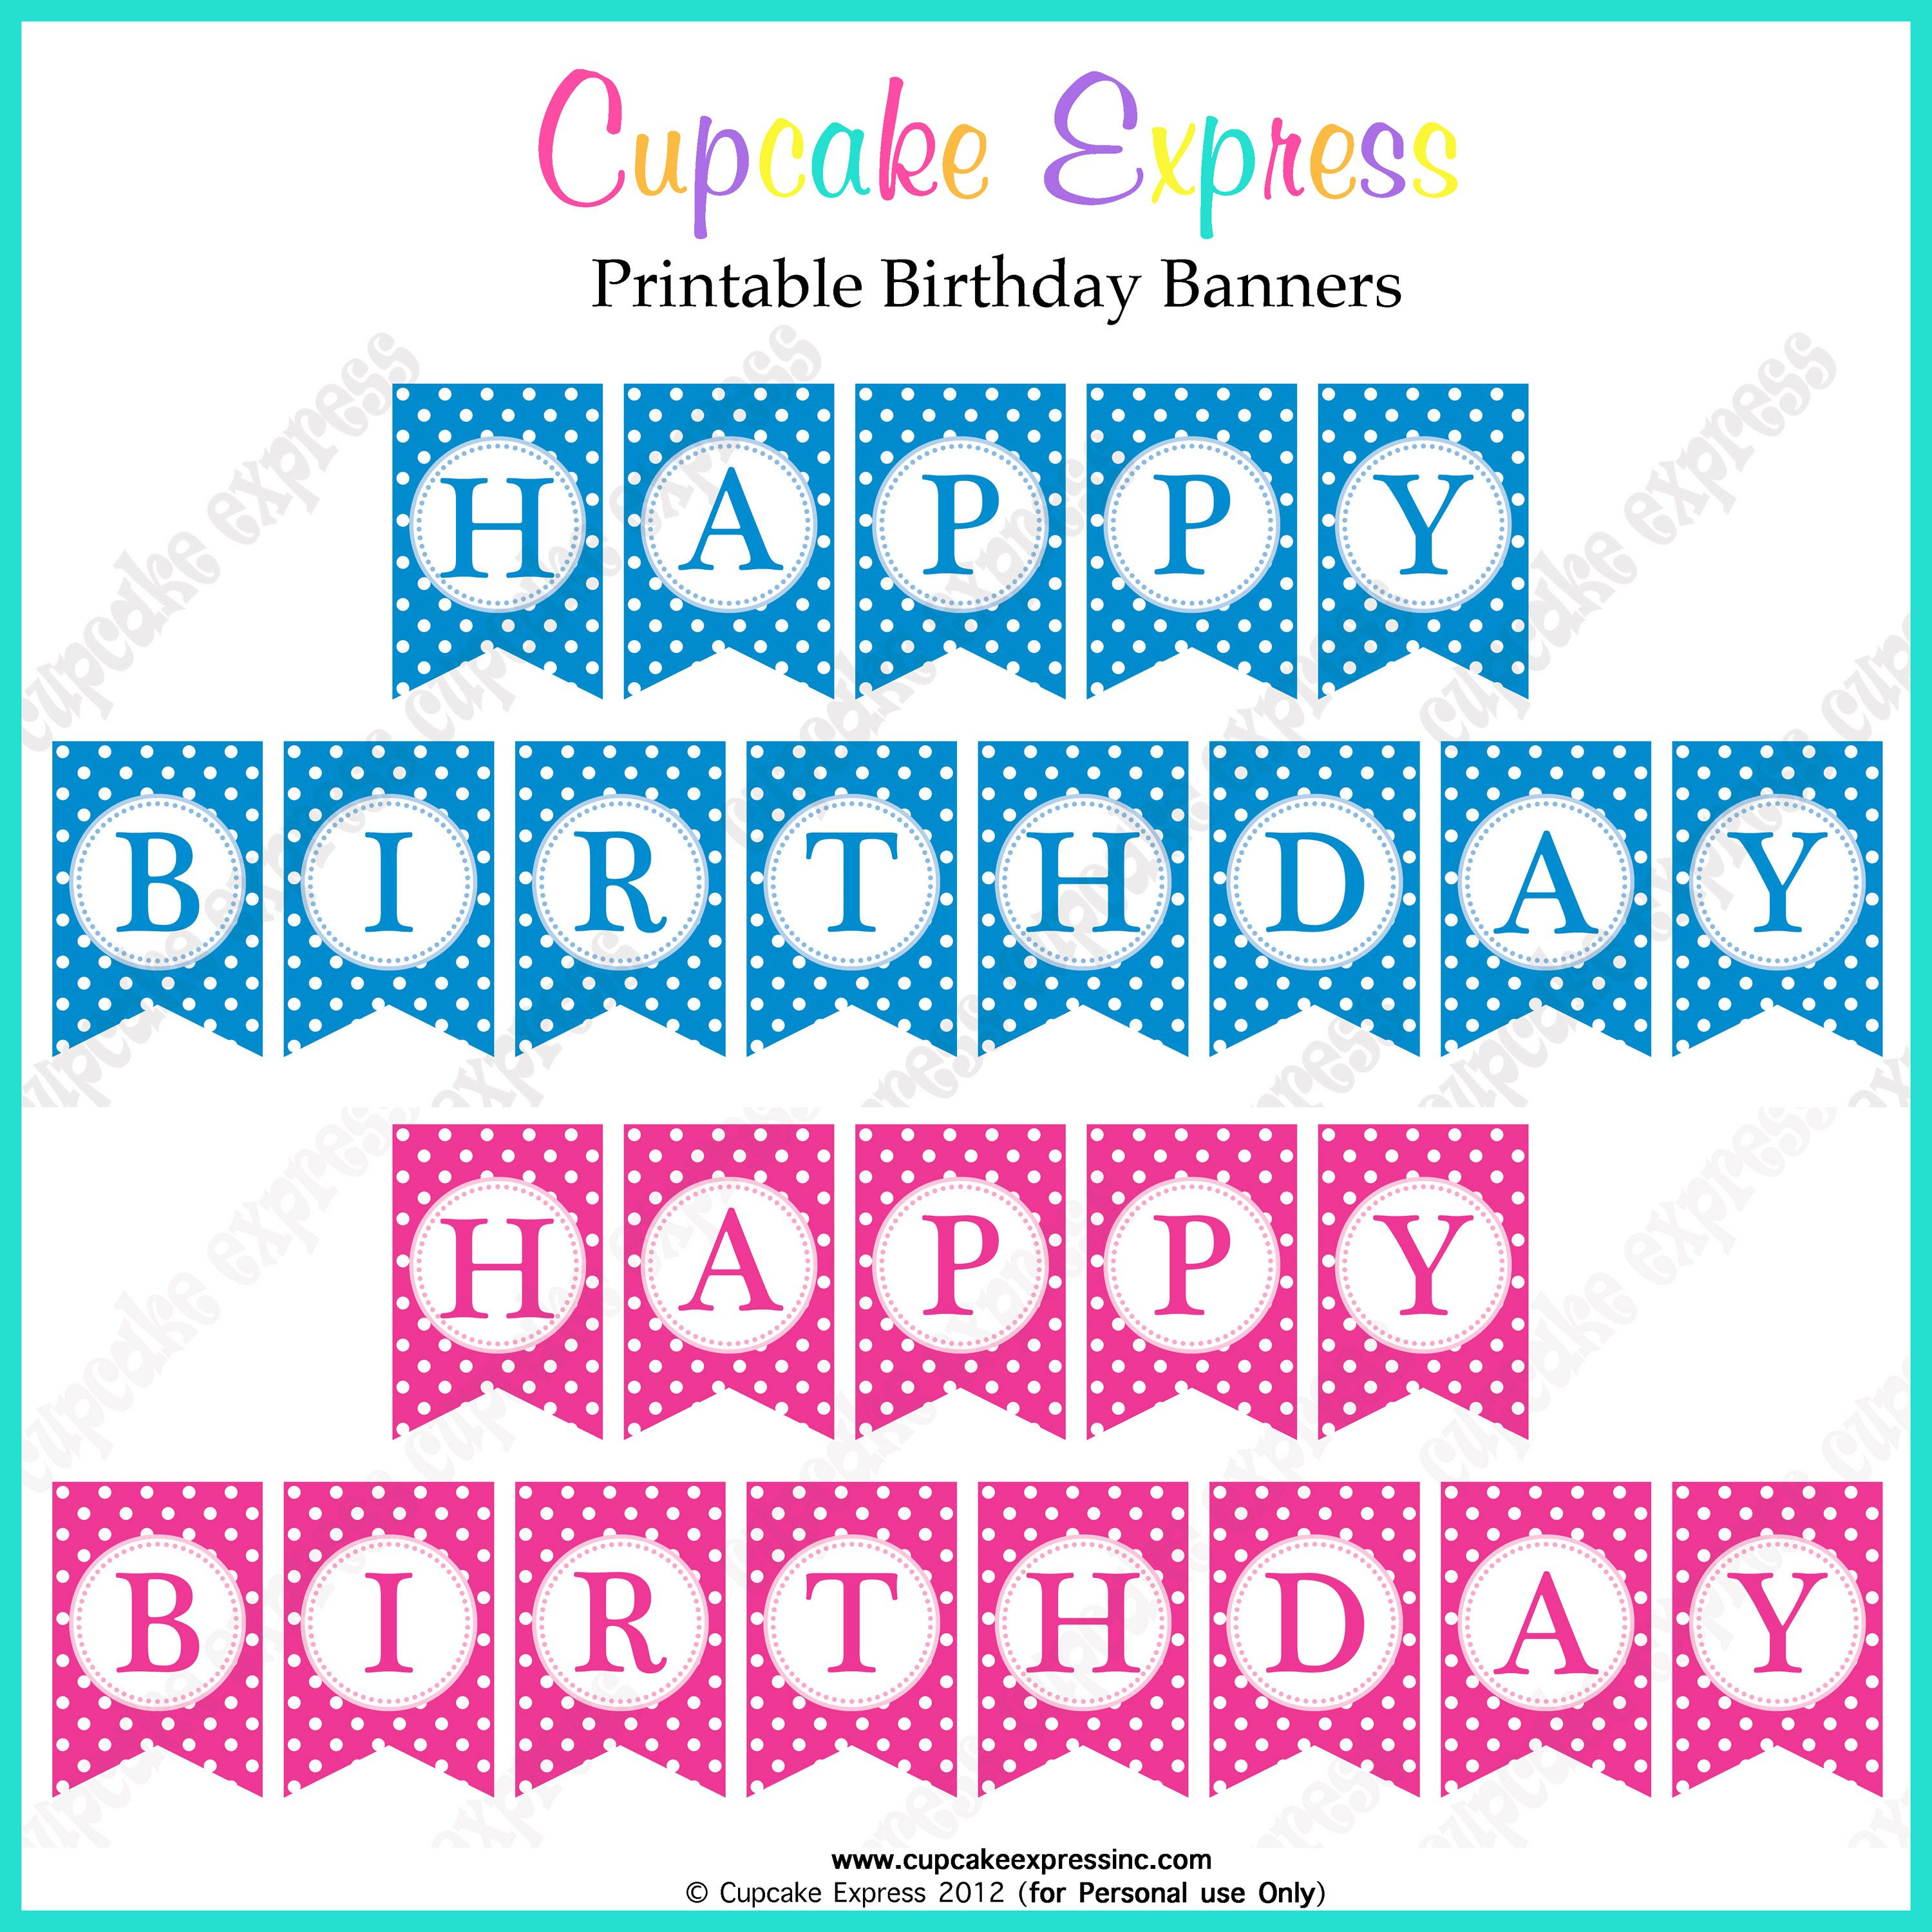 Free Printable Happy Birthday Banners Pink Blue | Free Printables - Free Printable Banner Maker